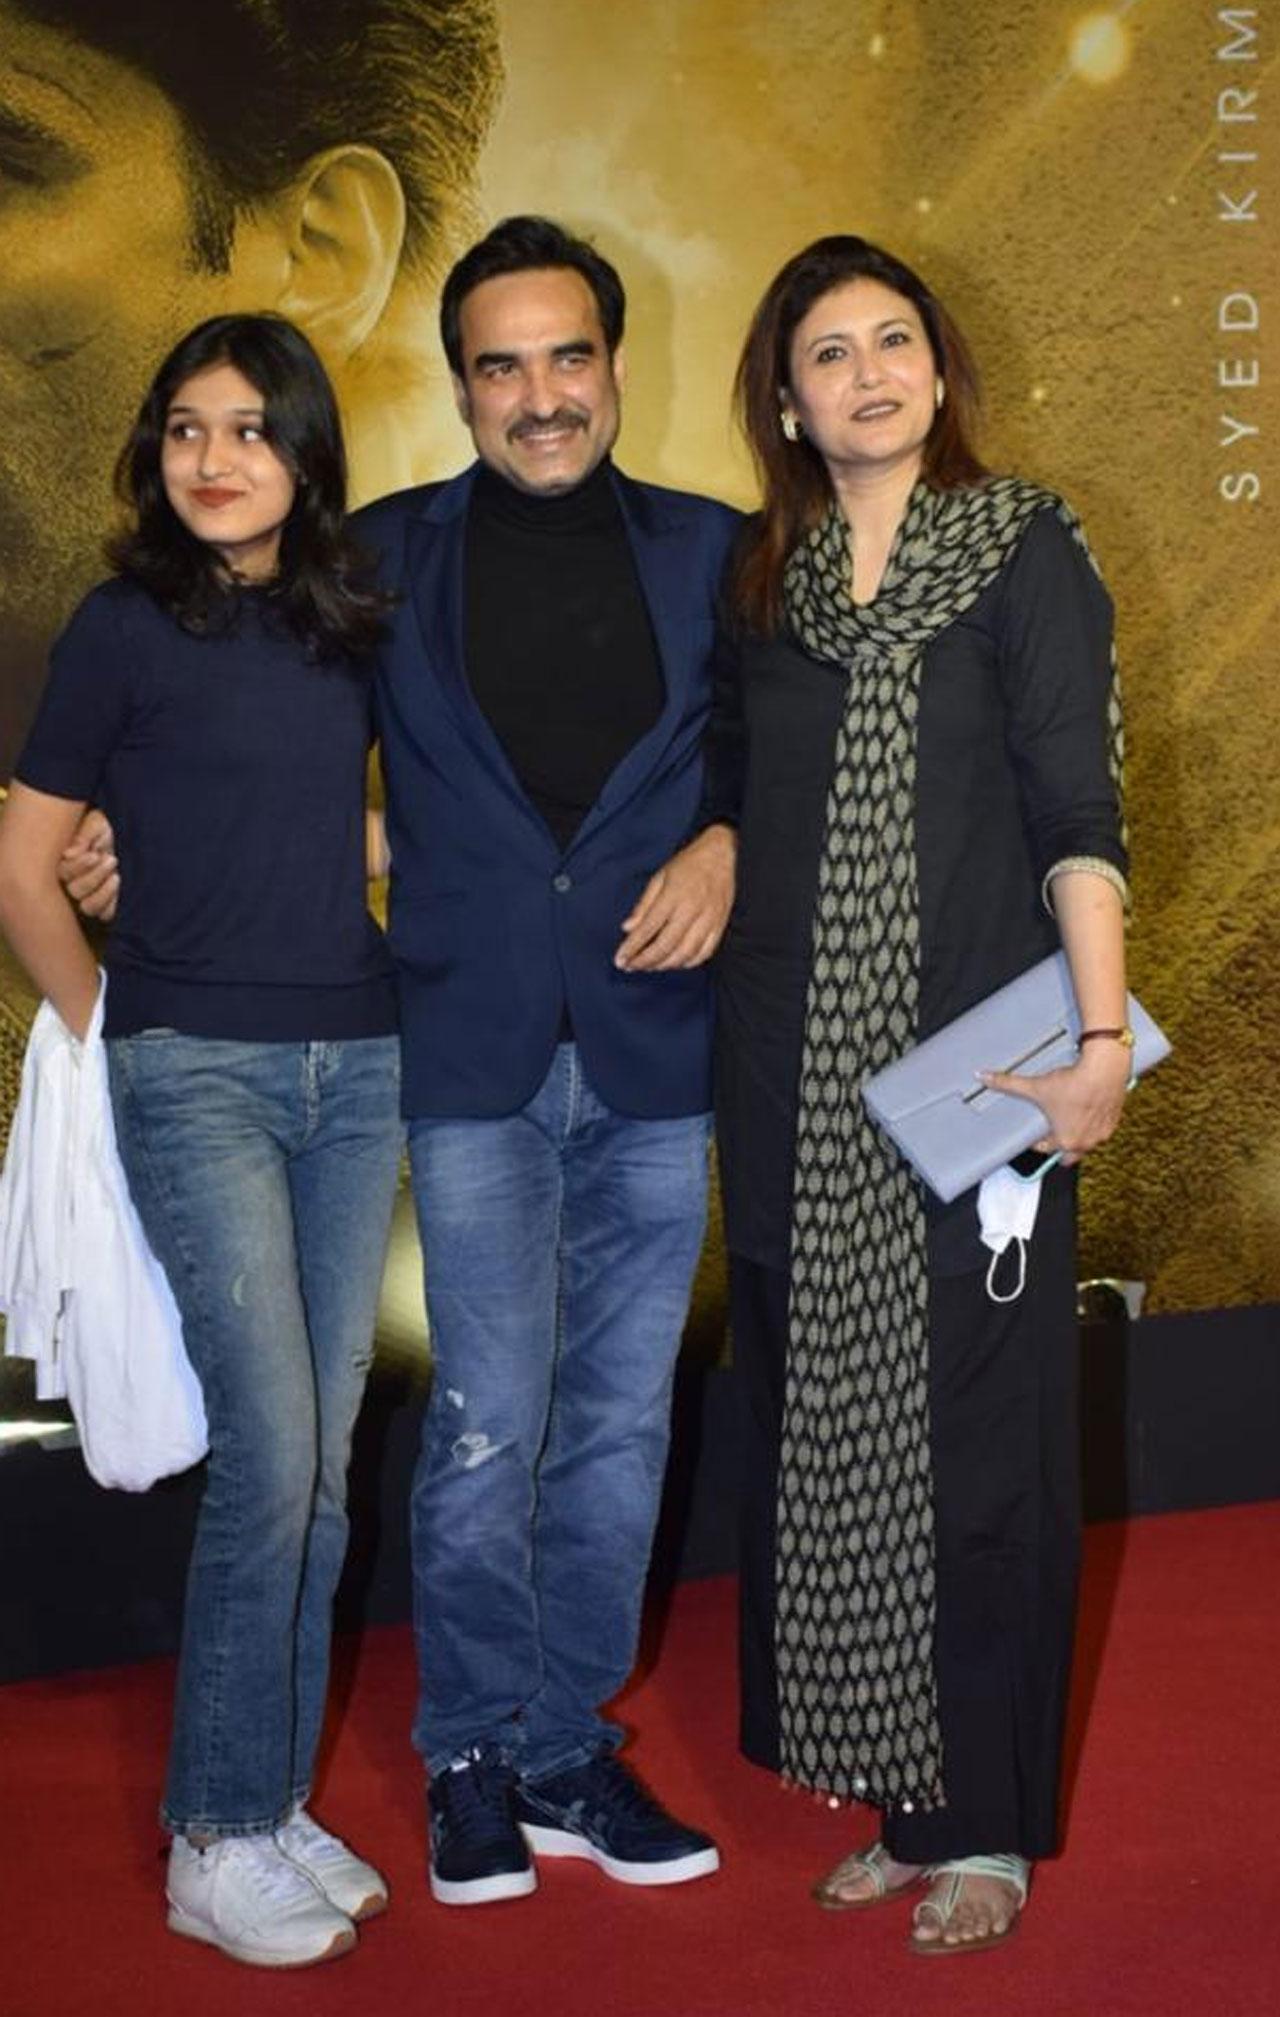 Pankaj Tripathi, who plays the coach Man Singh, was all smiles with his wife and daughter. Critics have already given out their verdict and the film seems to be a winner.